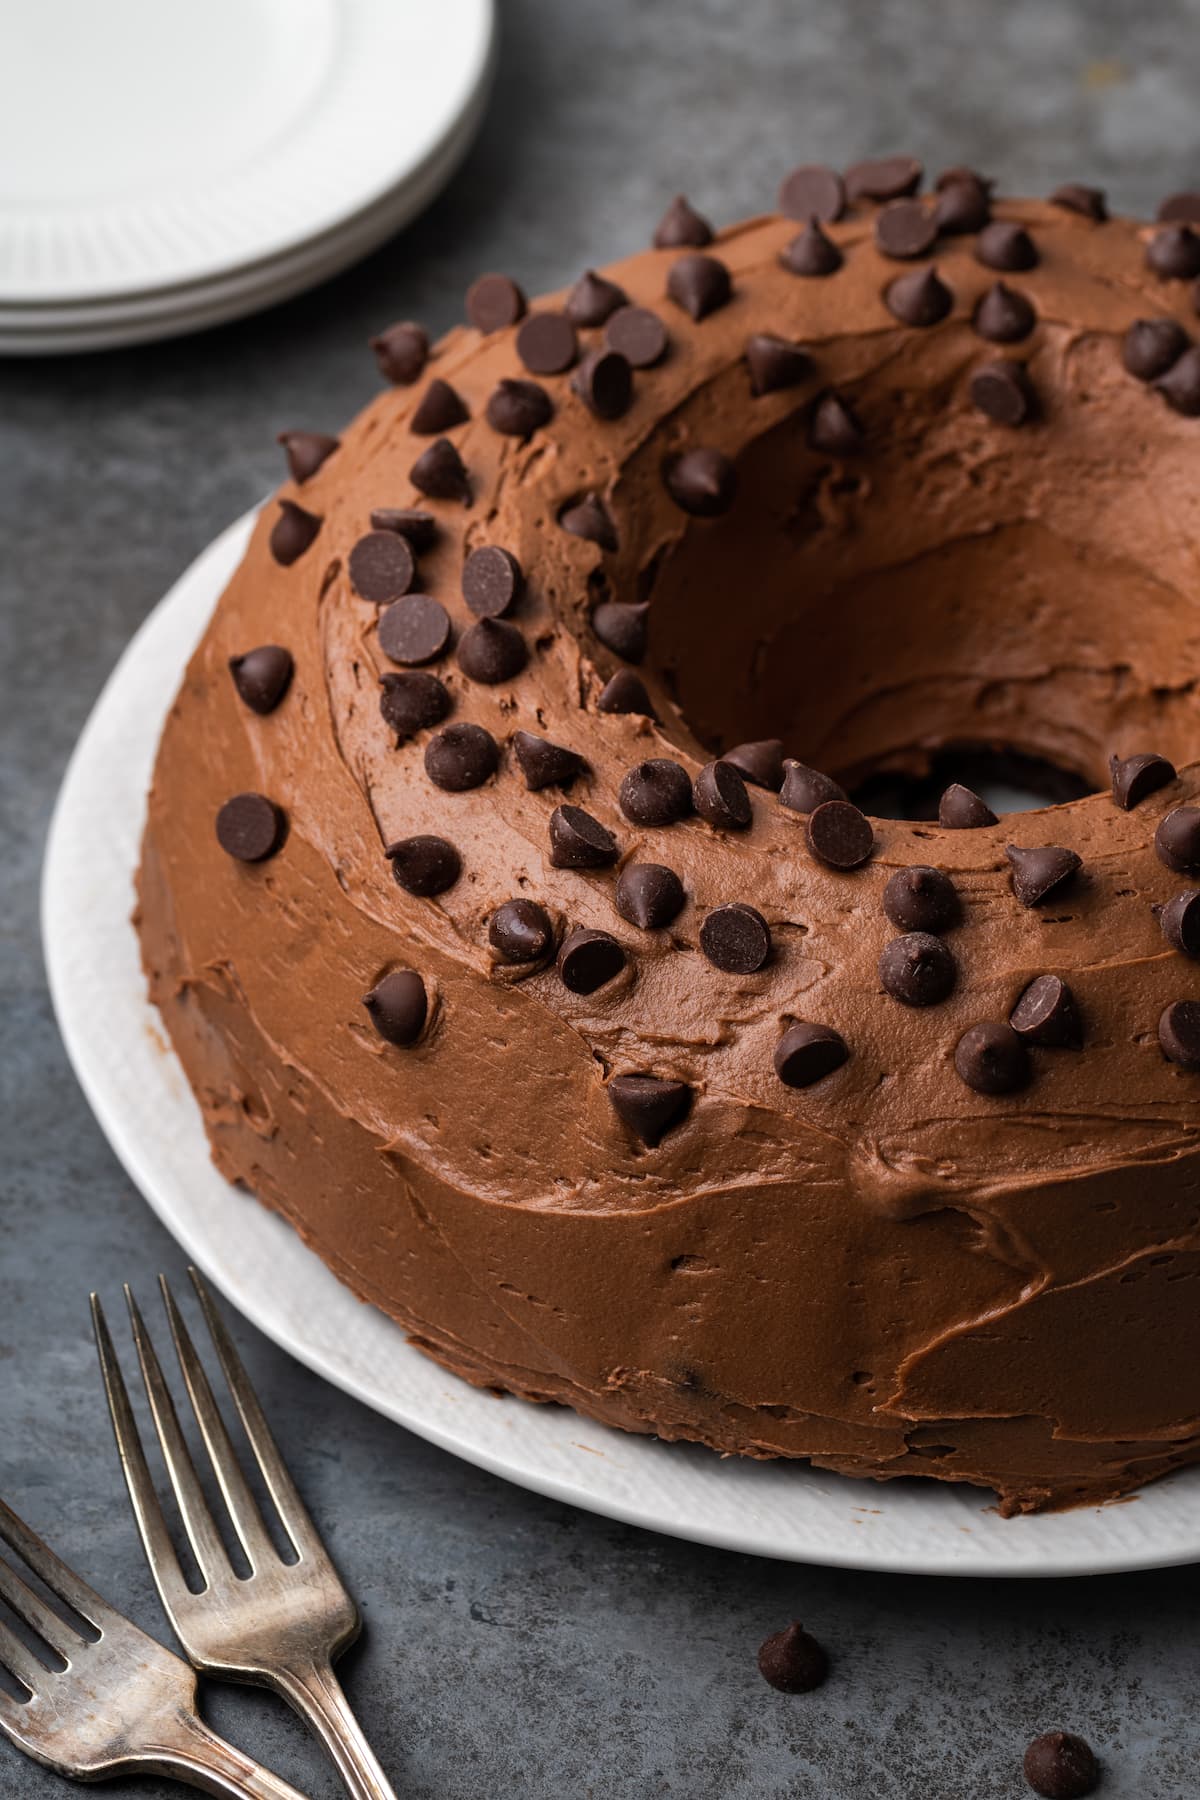 Ridiculous chocolate bundt cake on a plate frosted with chocolate frosting and topped with chocolate chips.